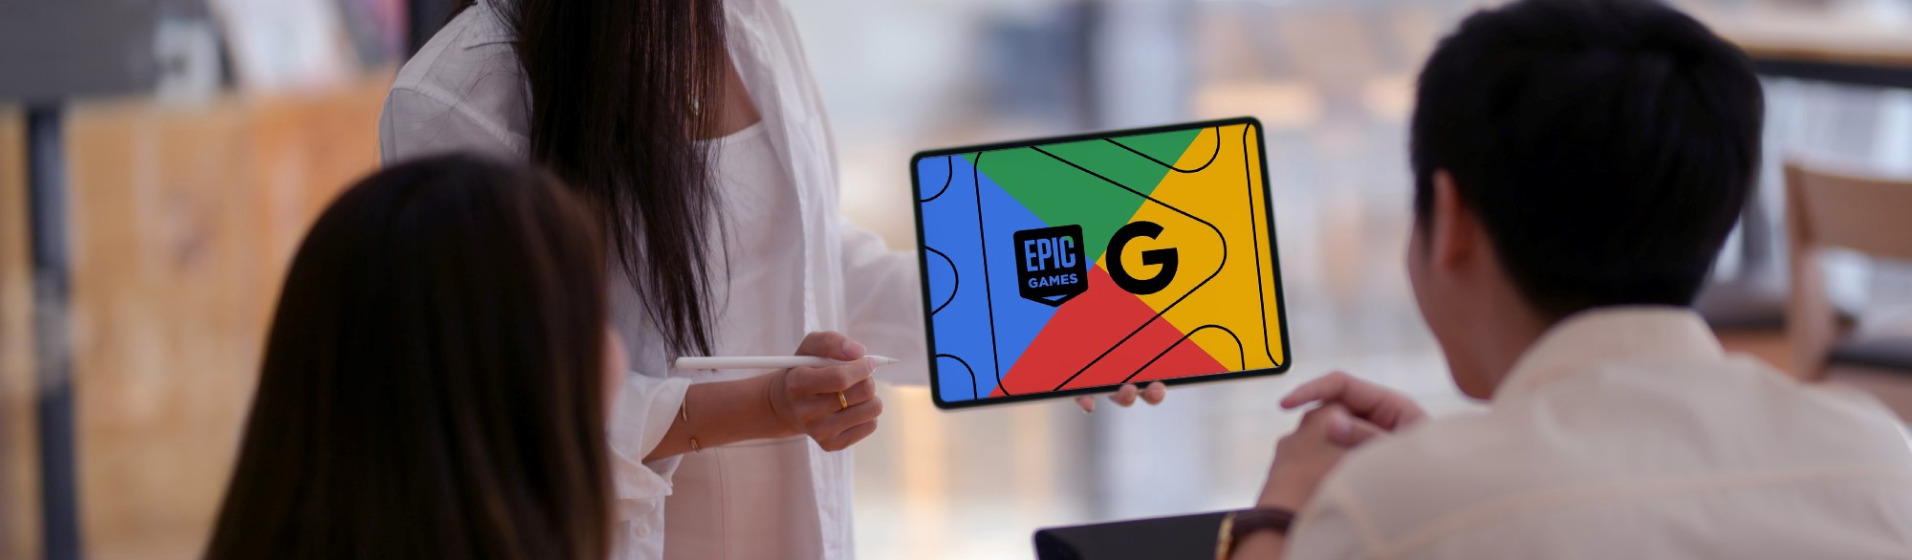 Alphabet Loses Antitrust Fight With Epic Games Over Google Play